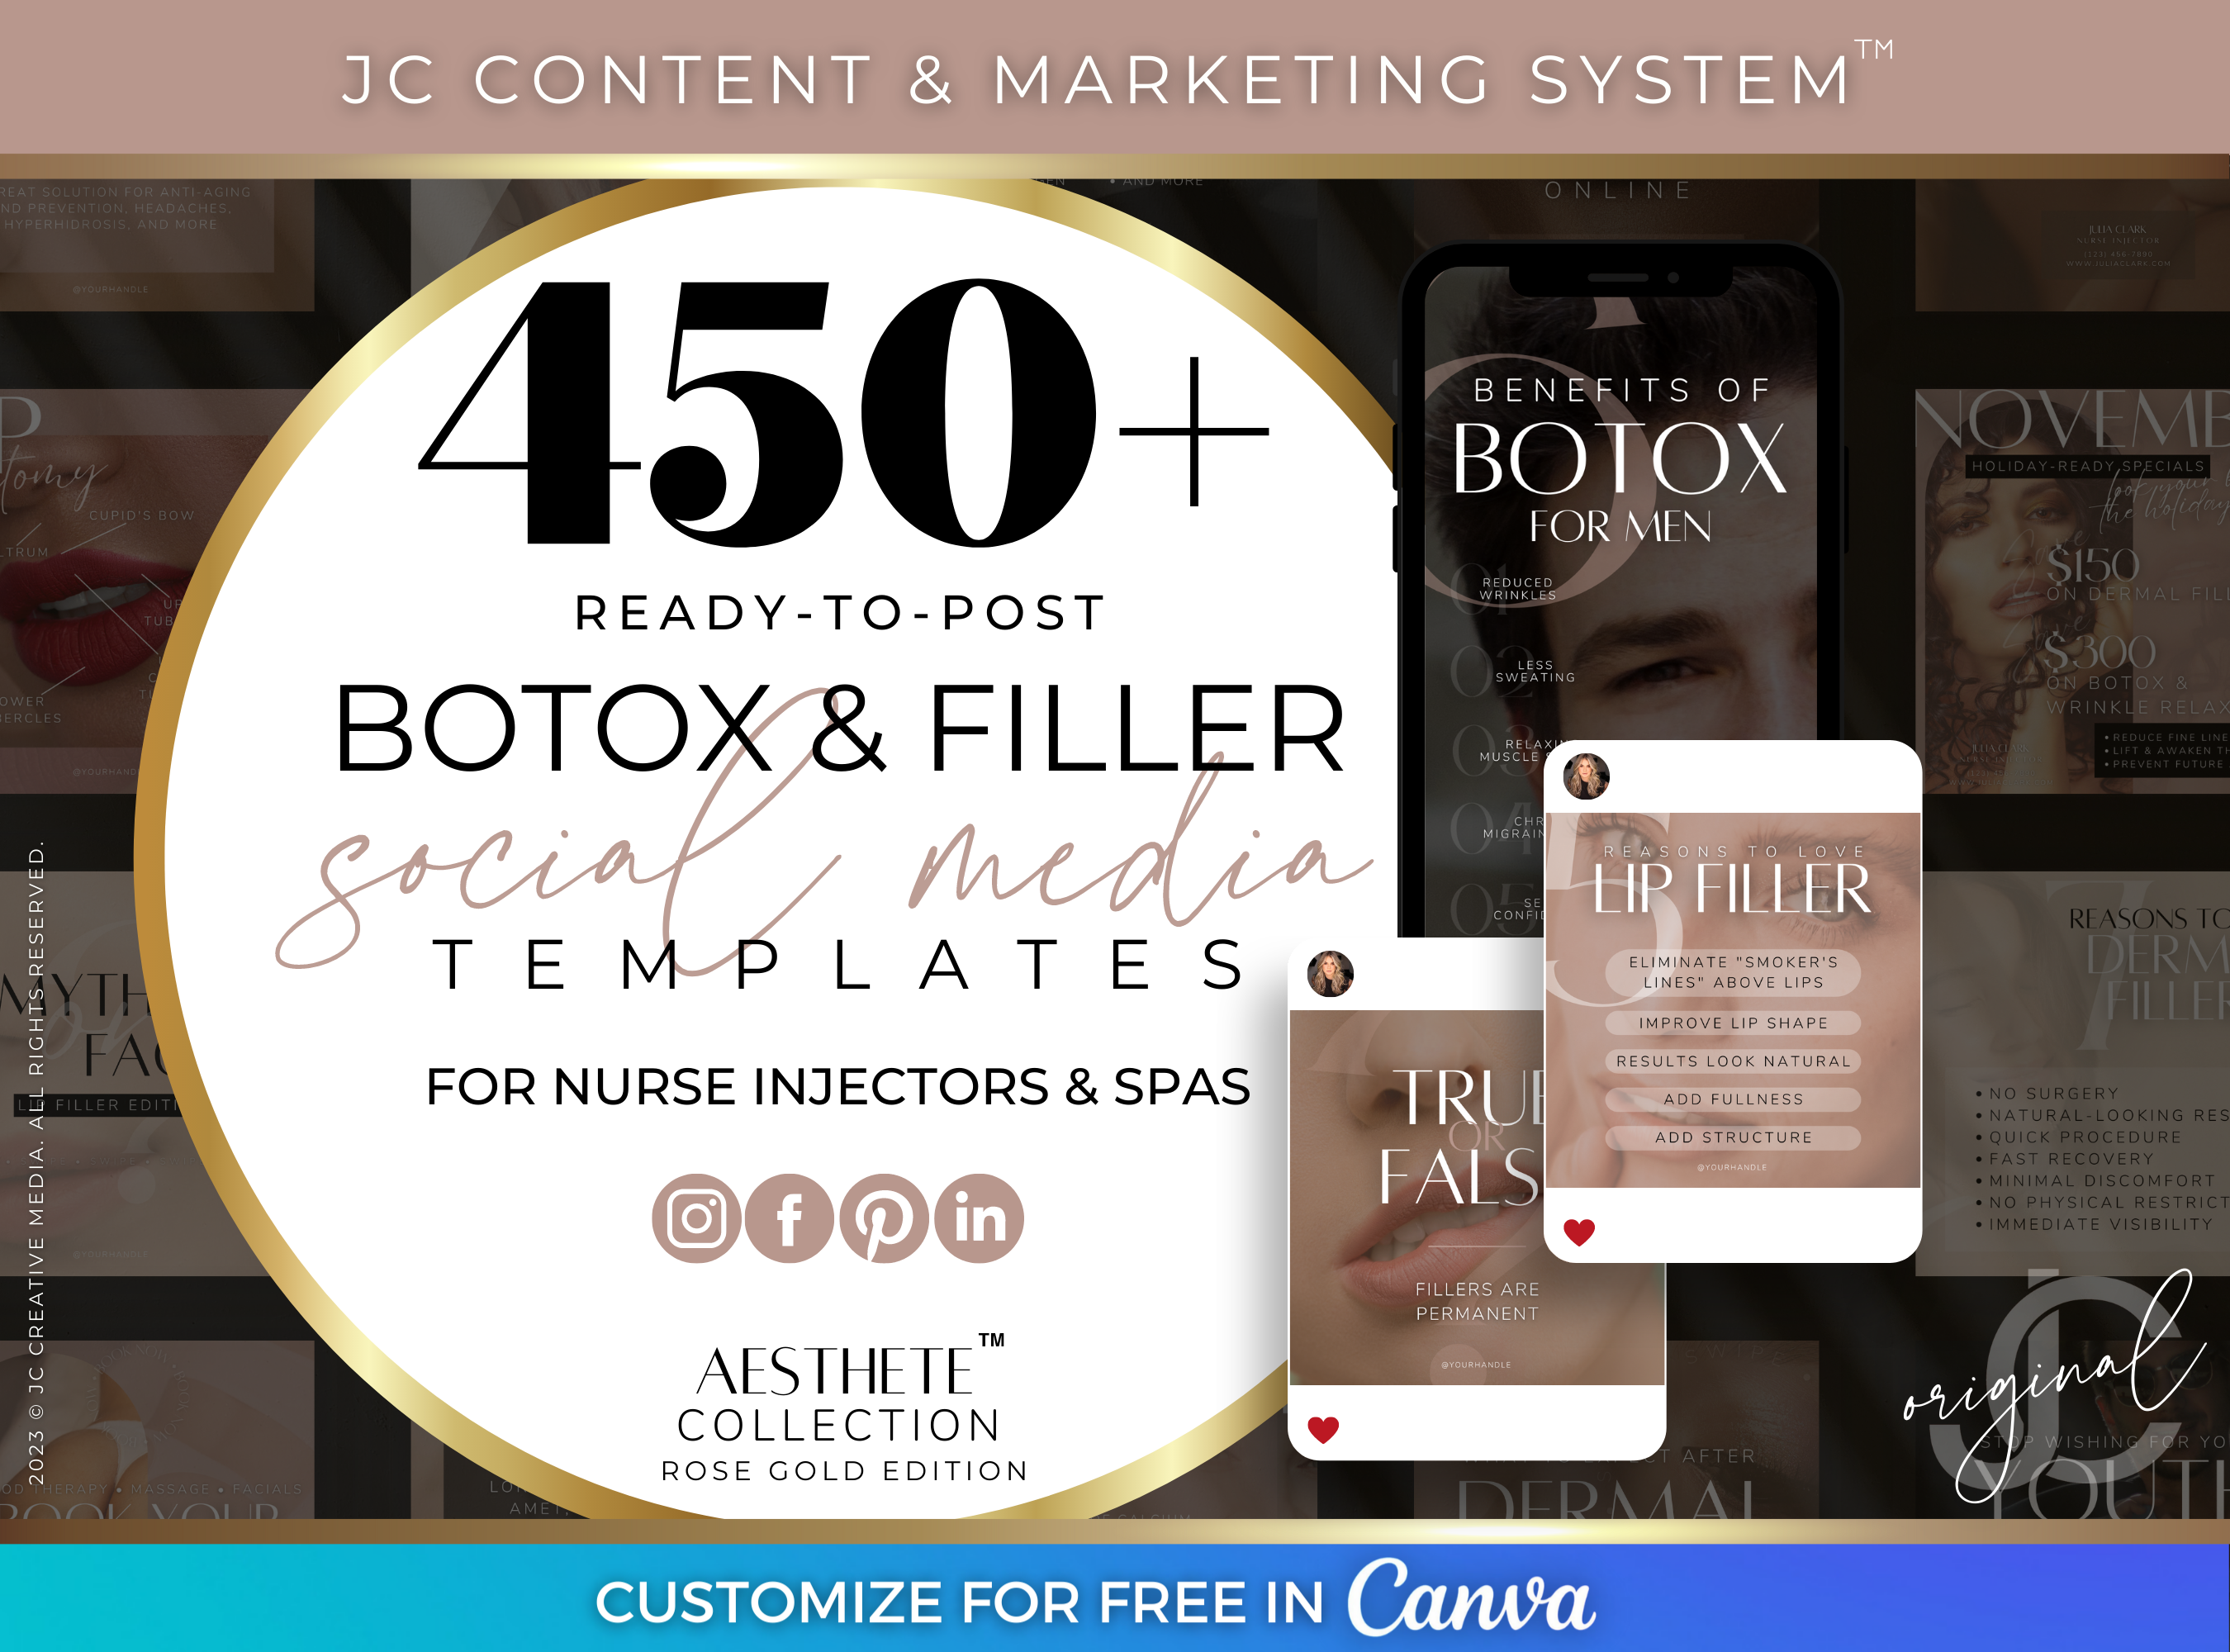 Nurse Injector Canva Templates for Botox and Filler Marketing (Rose Gold and Black Branding Kit)